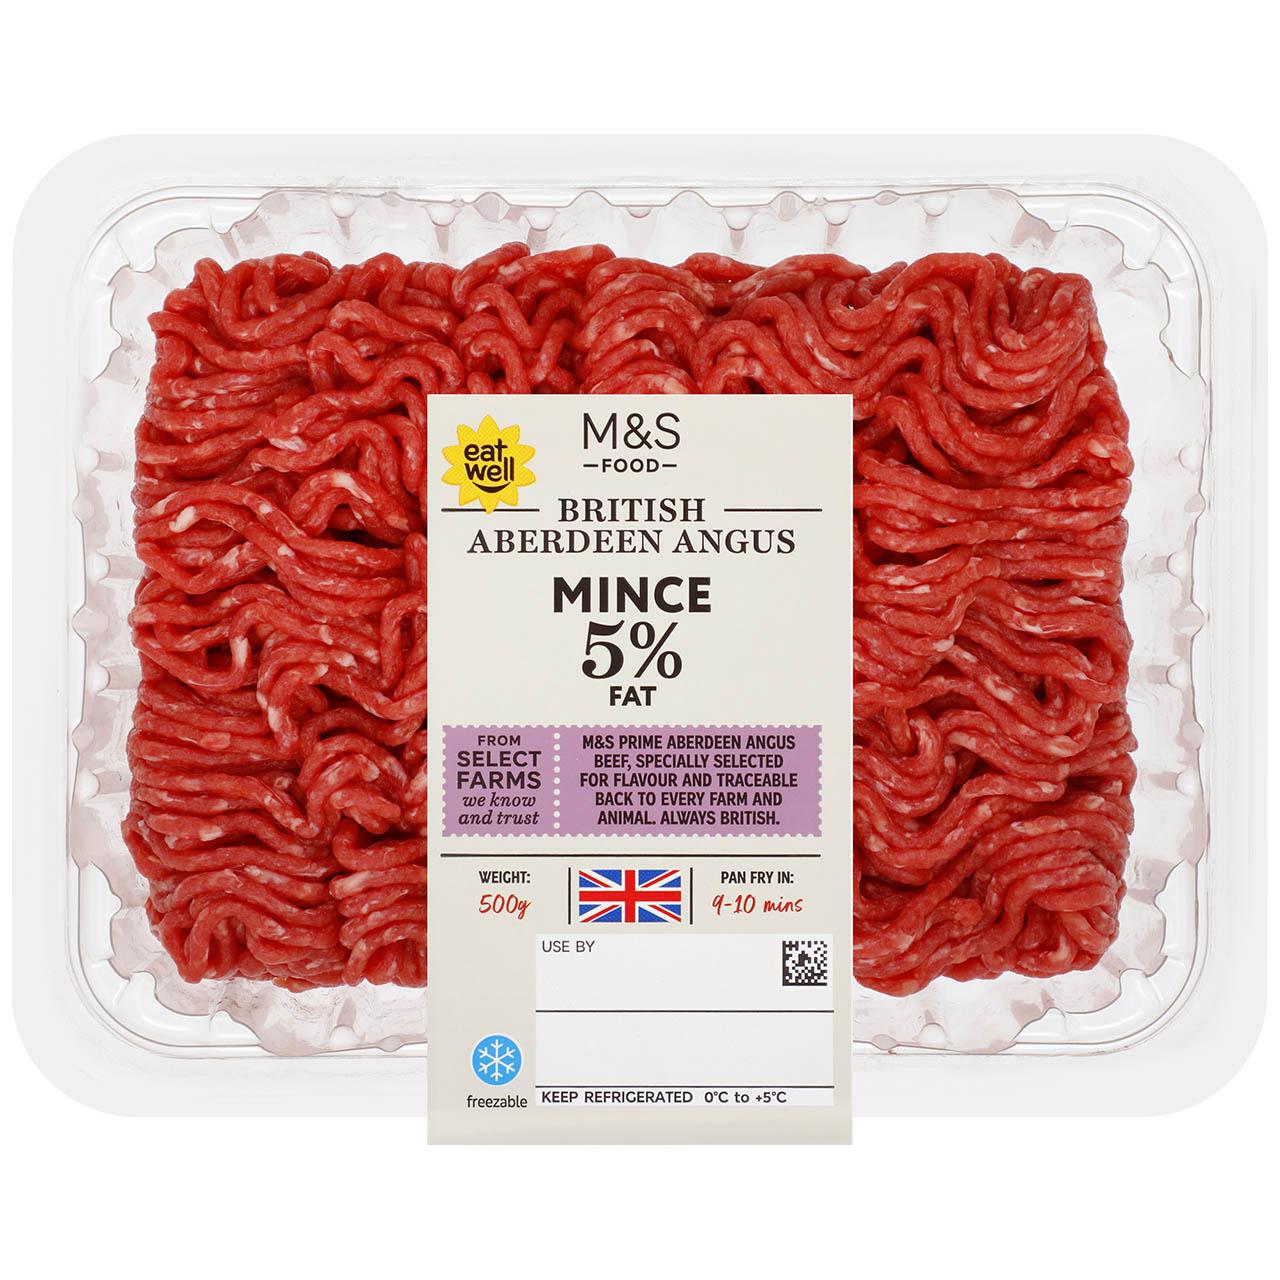 M&S Select Farms Aberdeen Angus Beef Mince 5% Fat 500g